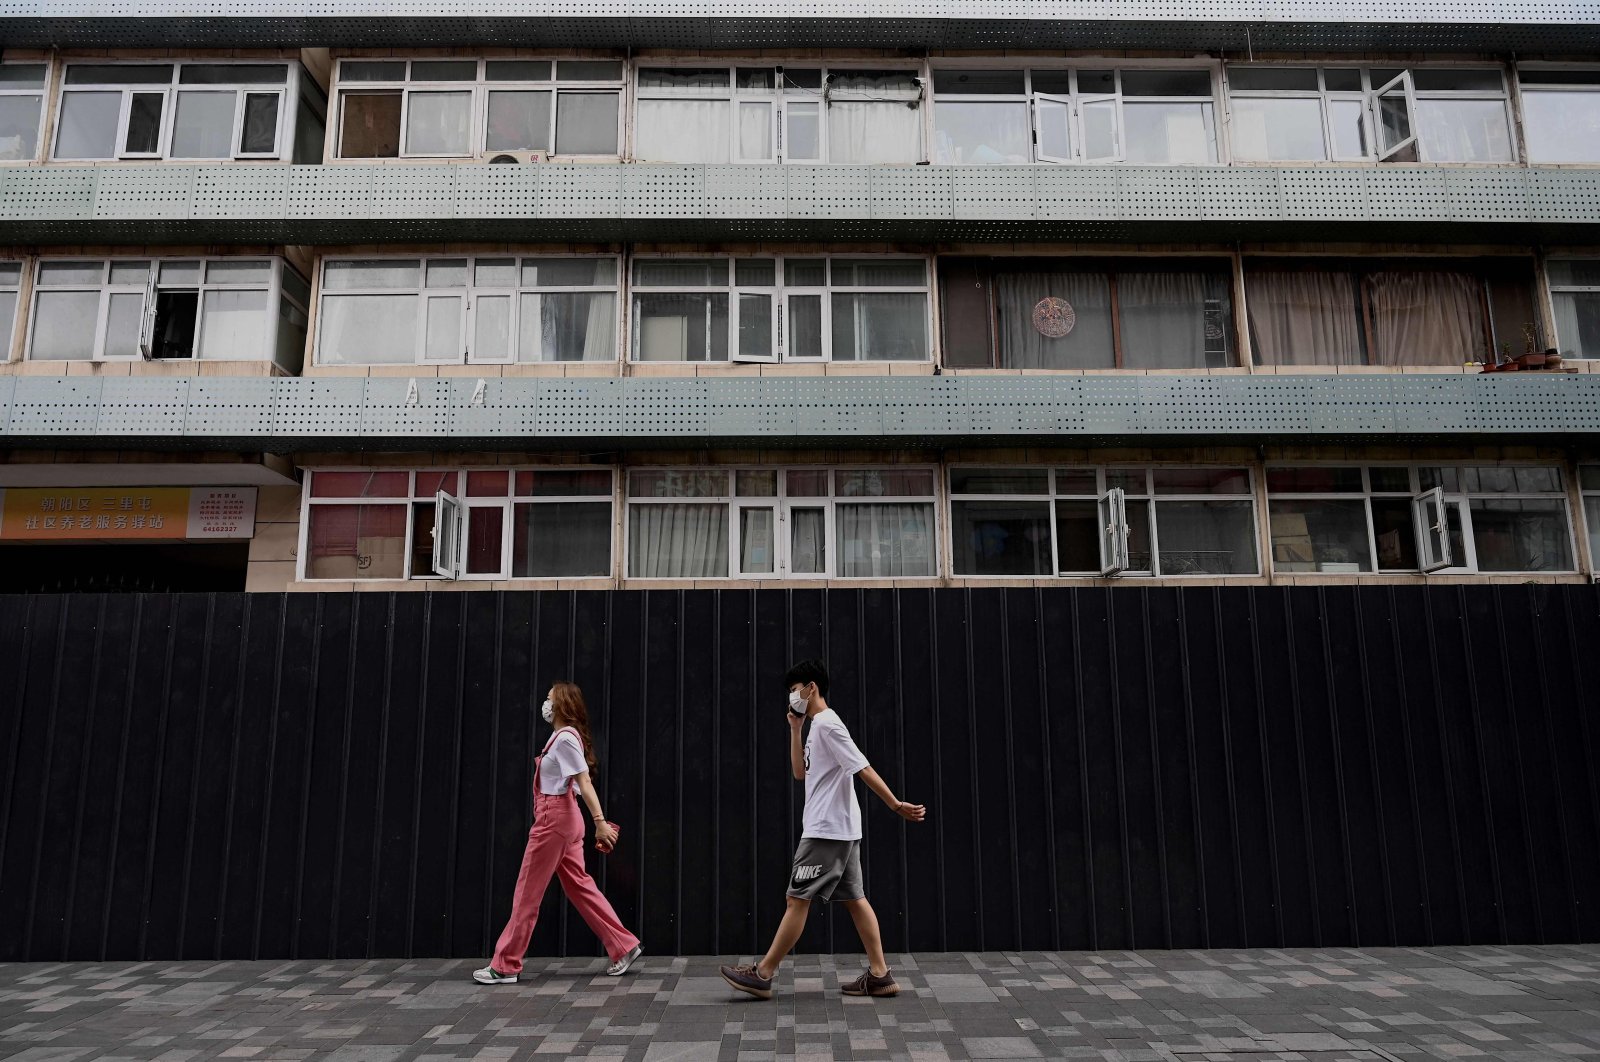 People walk past a residential area under lockdown due to COVID-19 restrictions in Beijing, China, June 15, 2022. (AFP Photo)